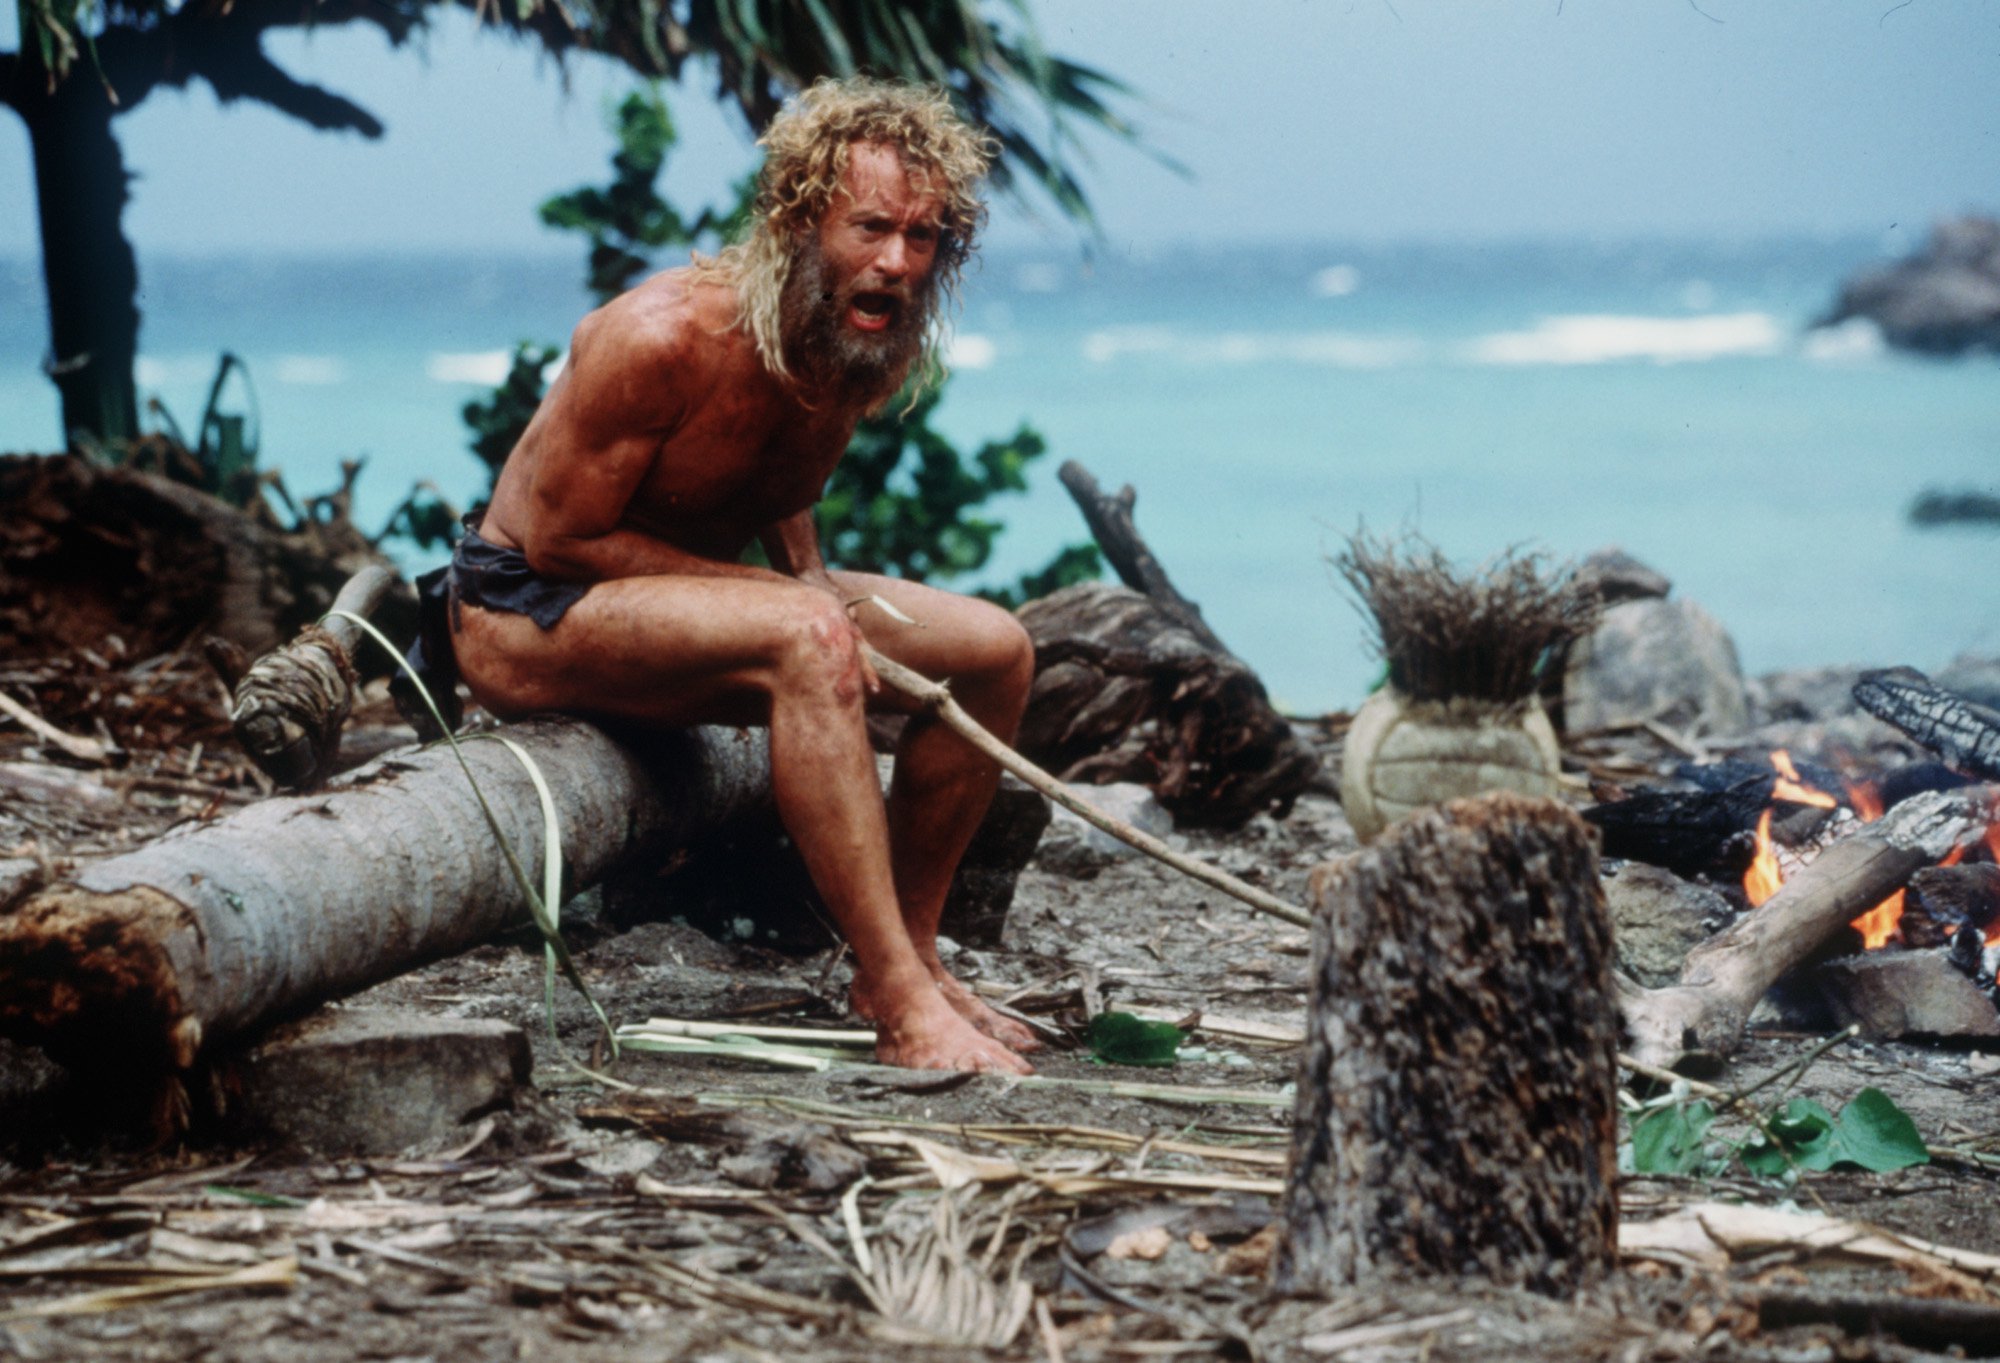 movies ruined with sex scenes - Cast away